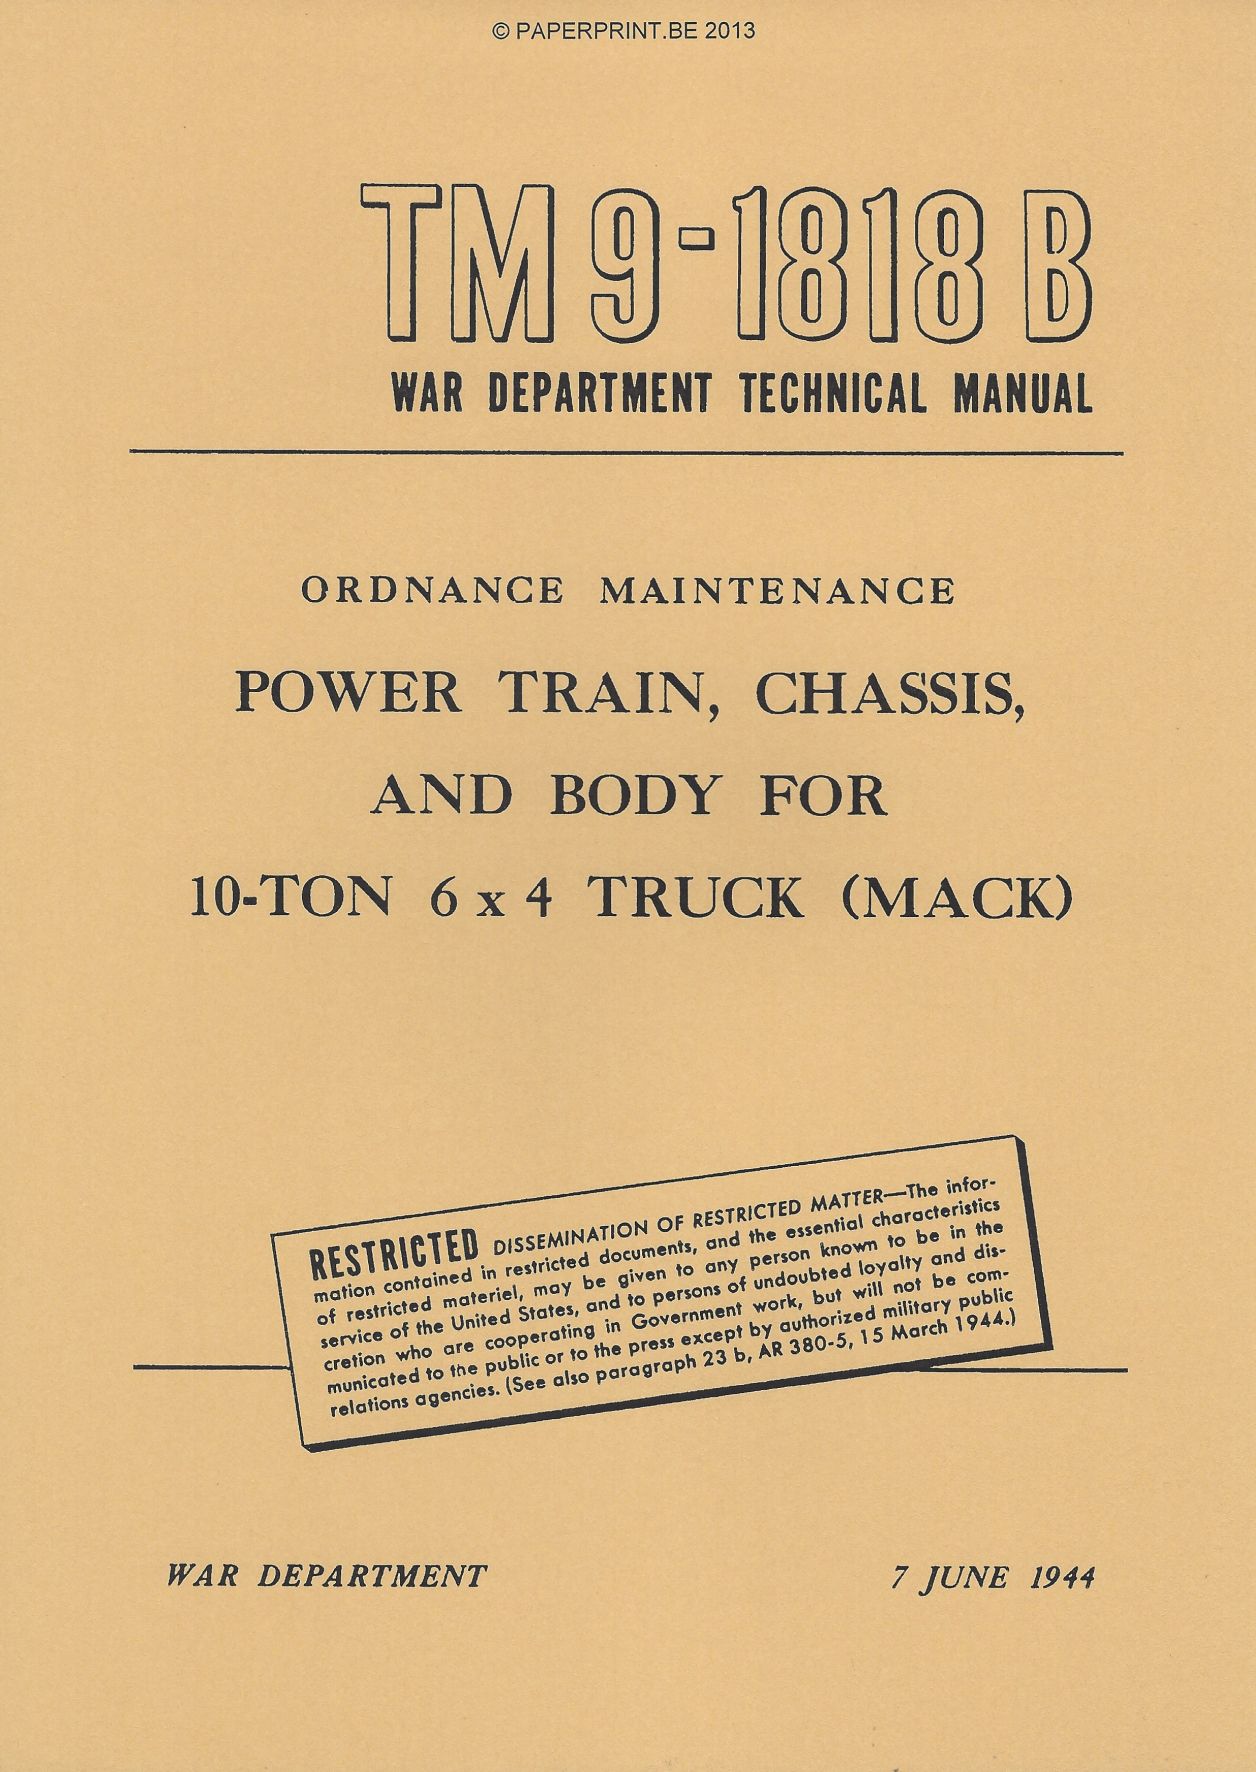 TM 9-1818B US POWER TRAIN, CHASSIS AND BODY FOR 10-TON 6x4 TRUCK (MACK)